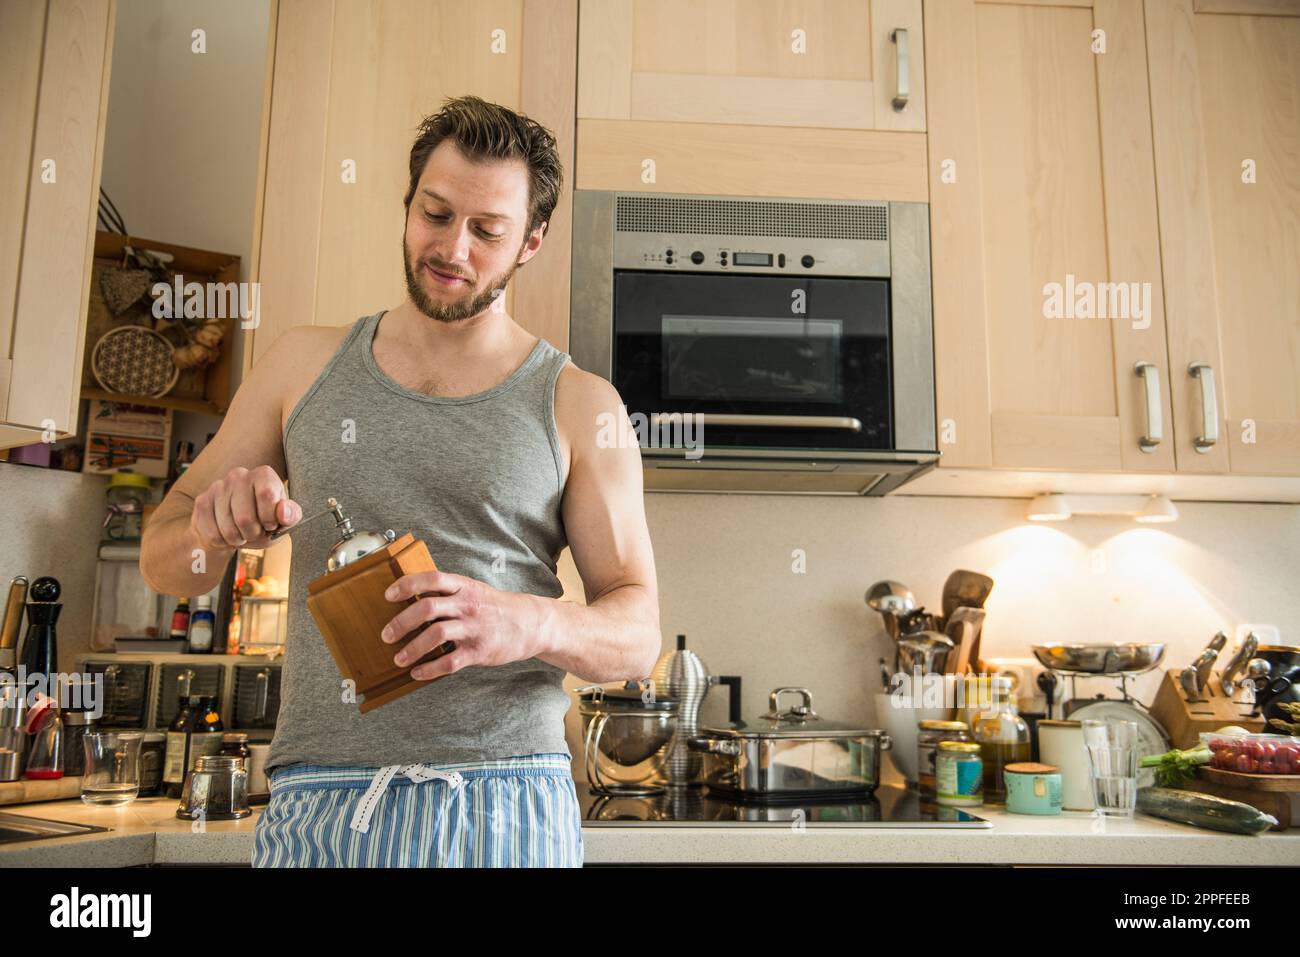 Man standing in kitchen and grinding coffee grinder, Munich, Bavaria, Germany Stock Photo